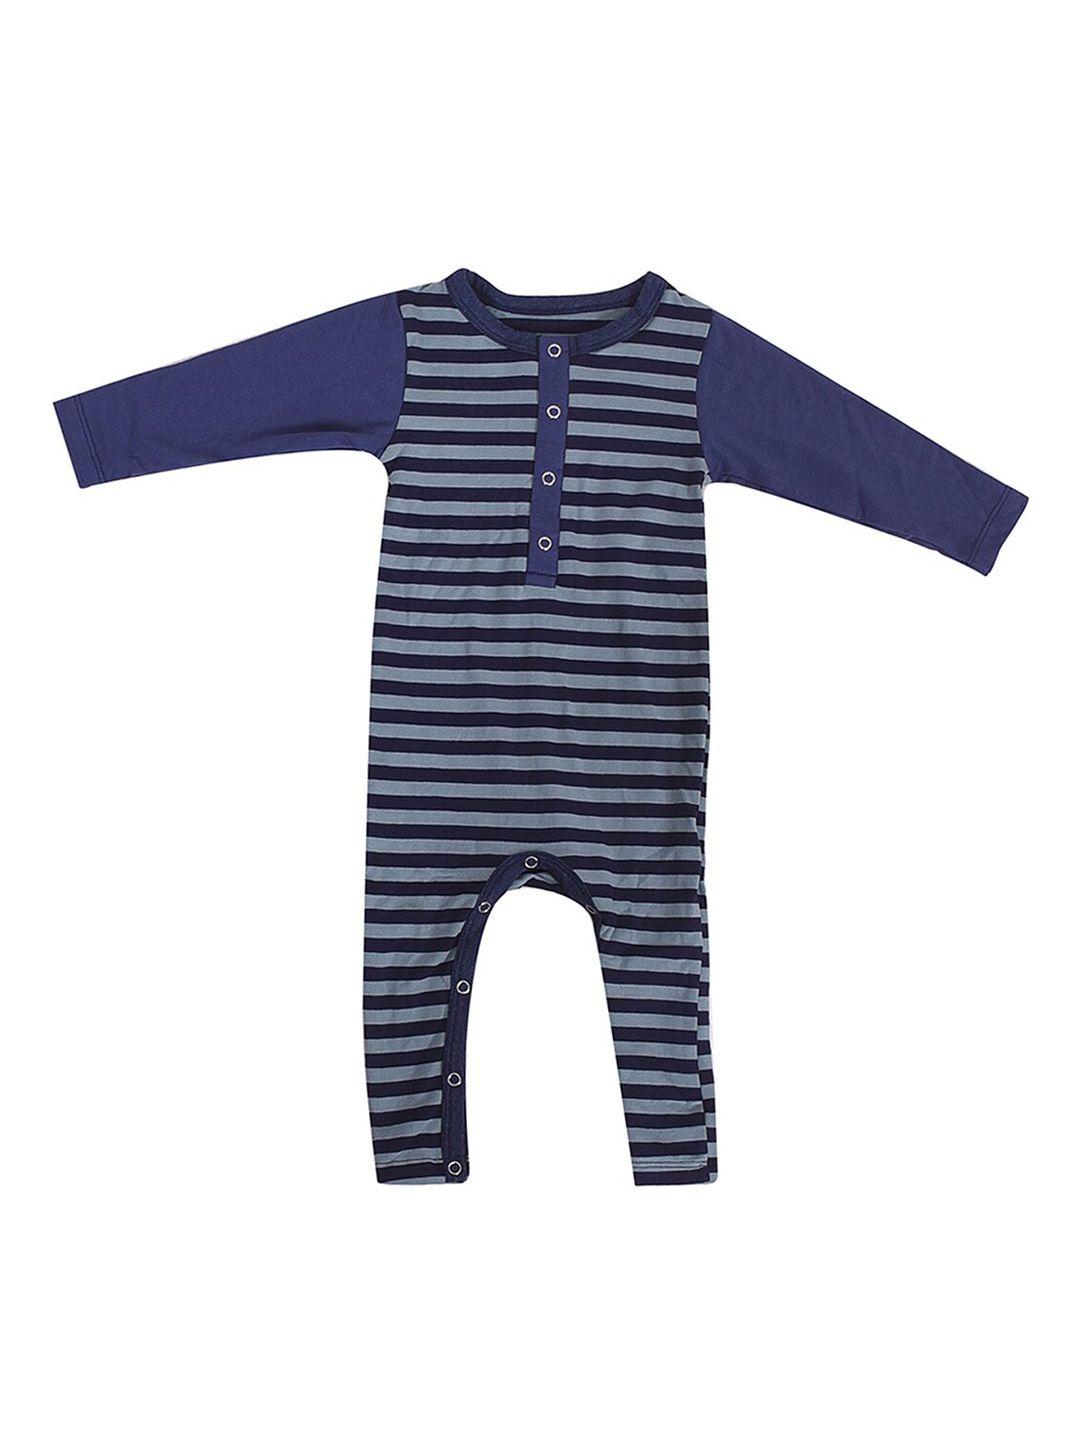 moms home kids blue striped organic cotton rompers